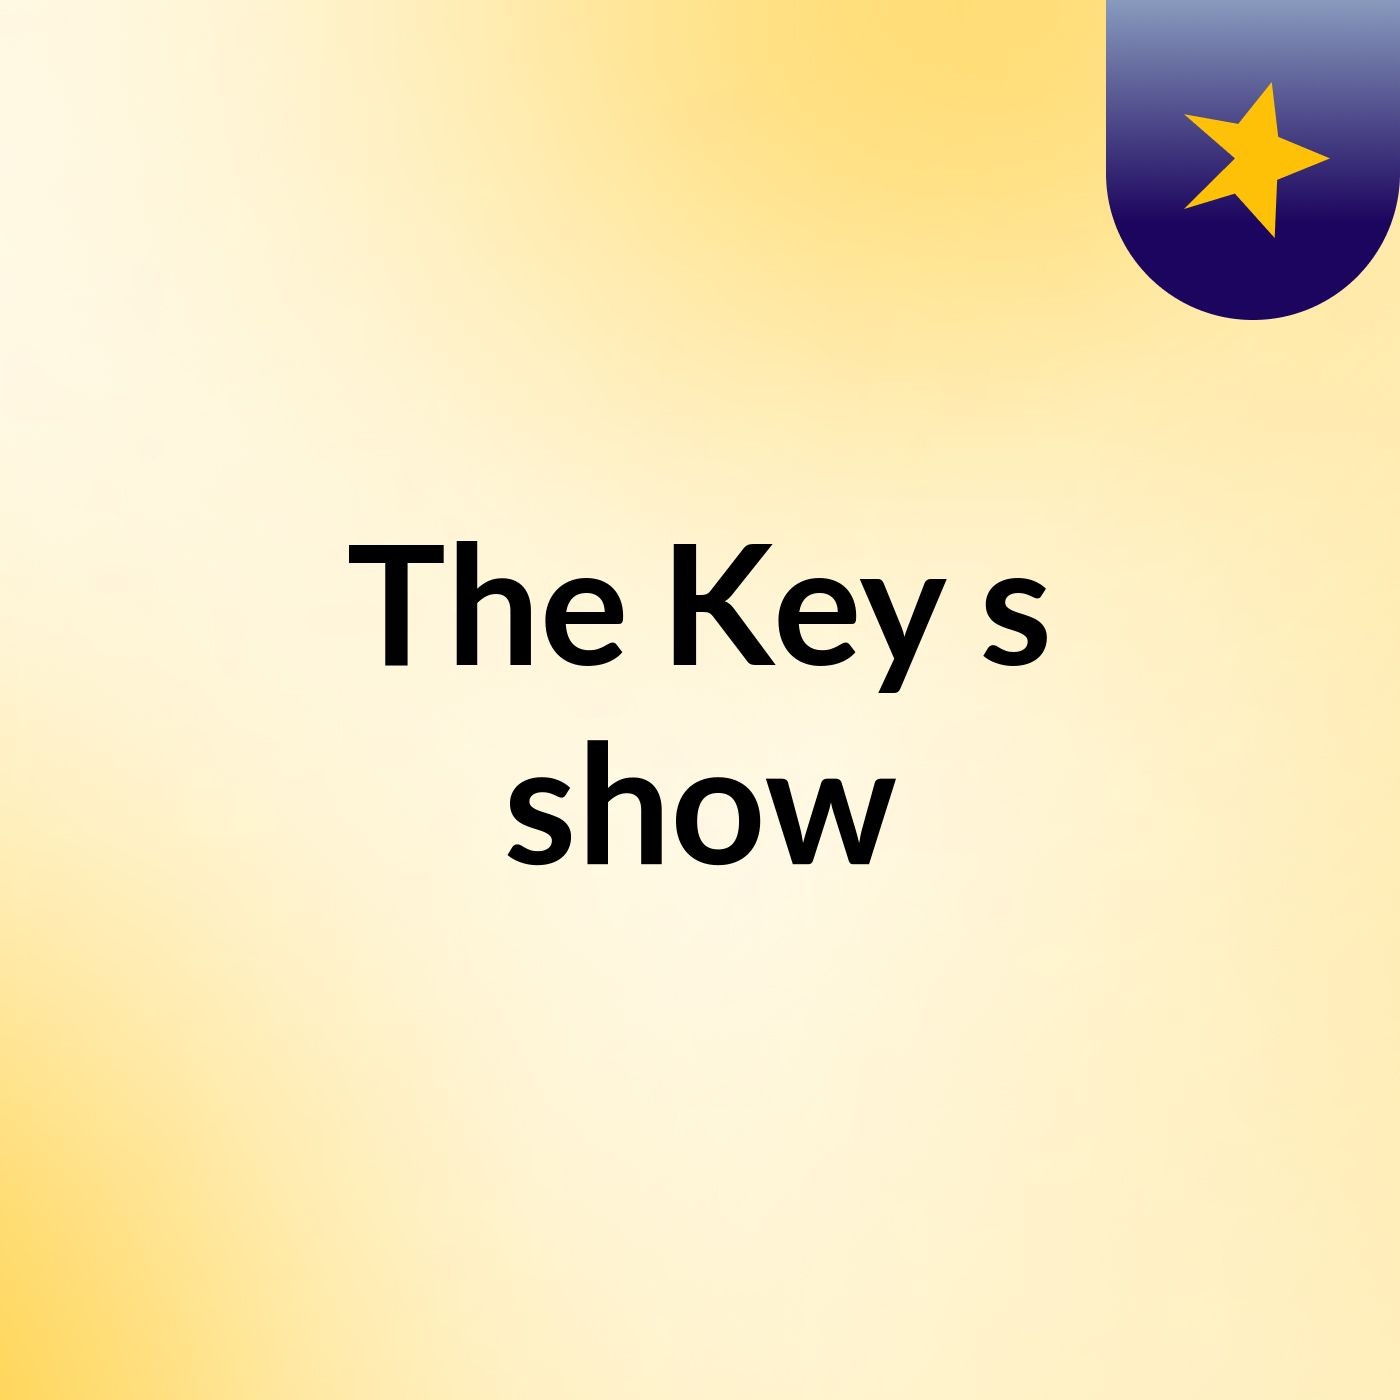 The Key's show